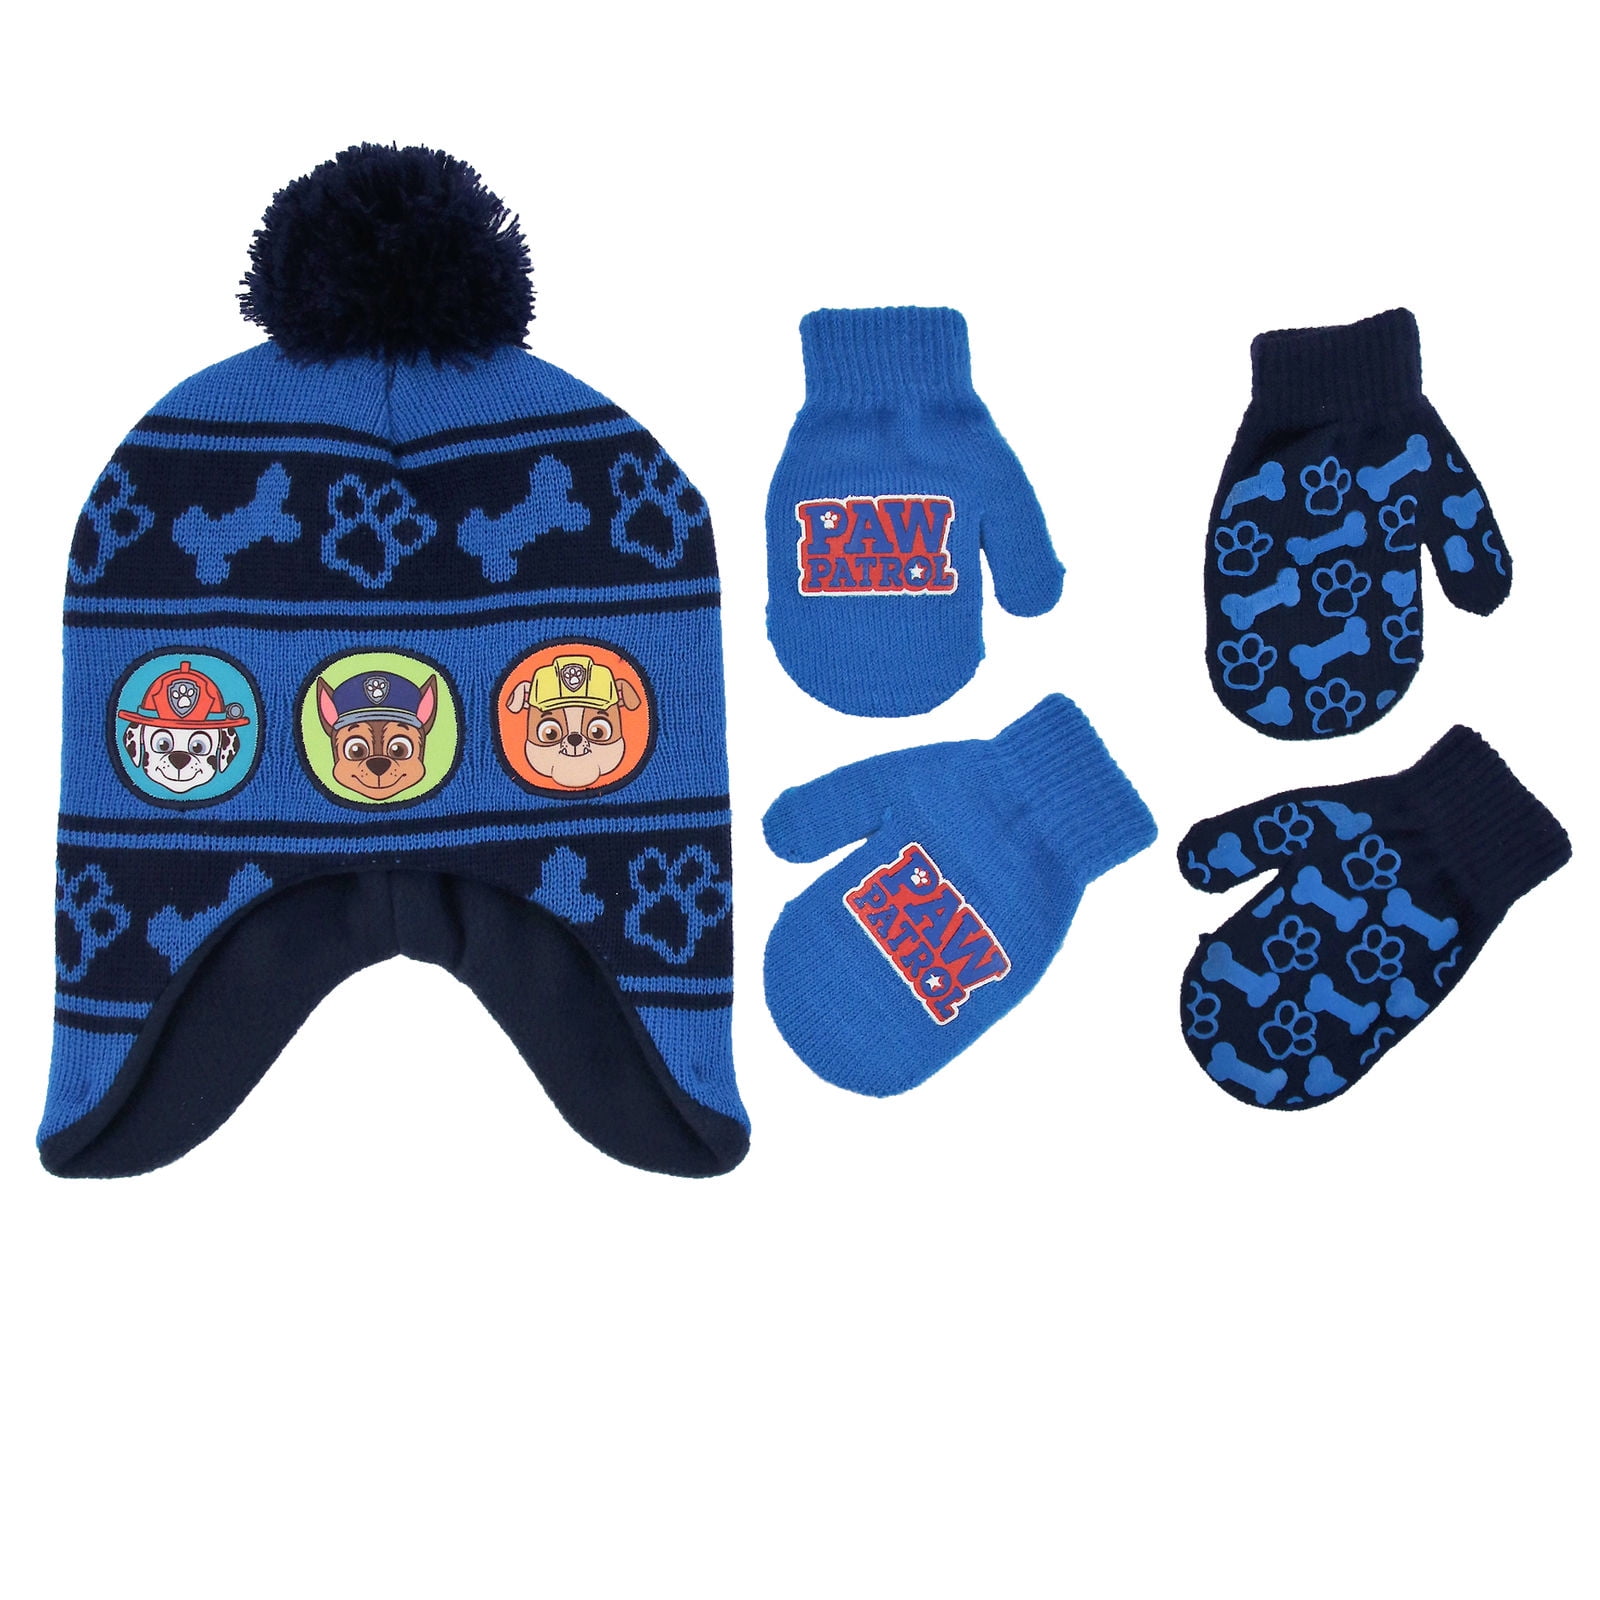 Age 2-4 blue Nickelodeon Boys Toddler Paw Patrol Beanie Hat and Mittens Cold Weather Set 